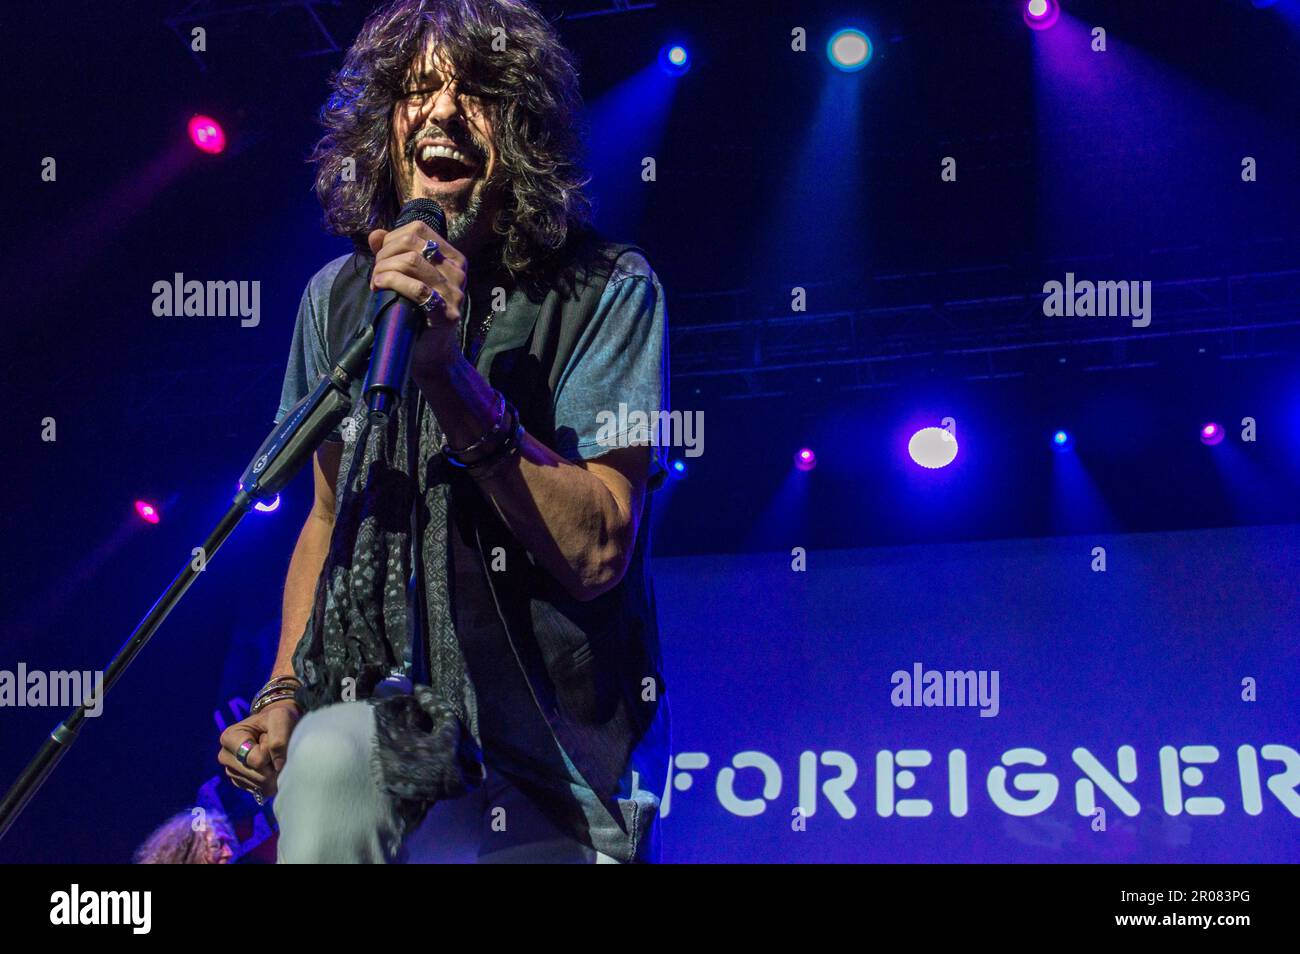 12 April, 2015, Las Vegas, Nevada: Vocalist Kelly Hansen performs with Foreigner at a corporate show. Stock Photo